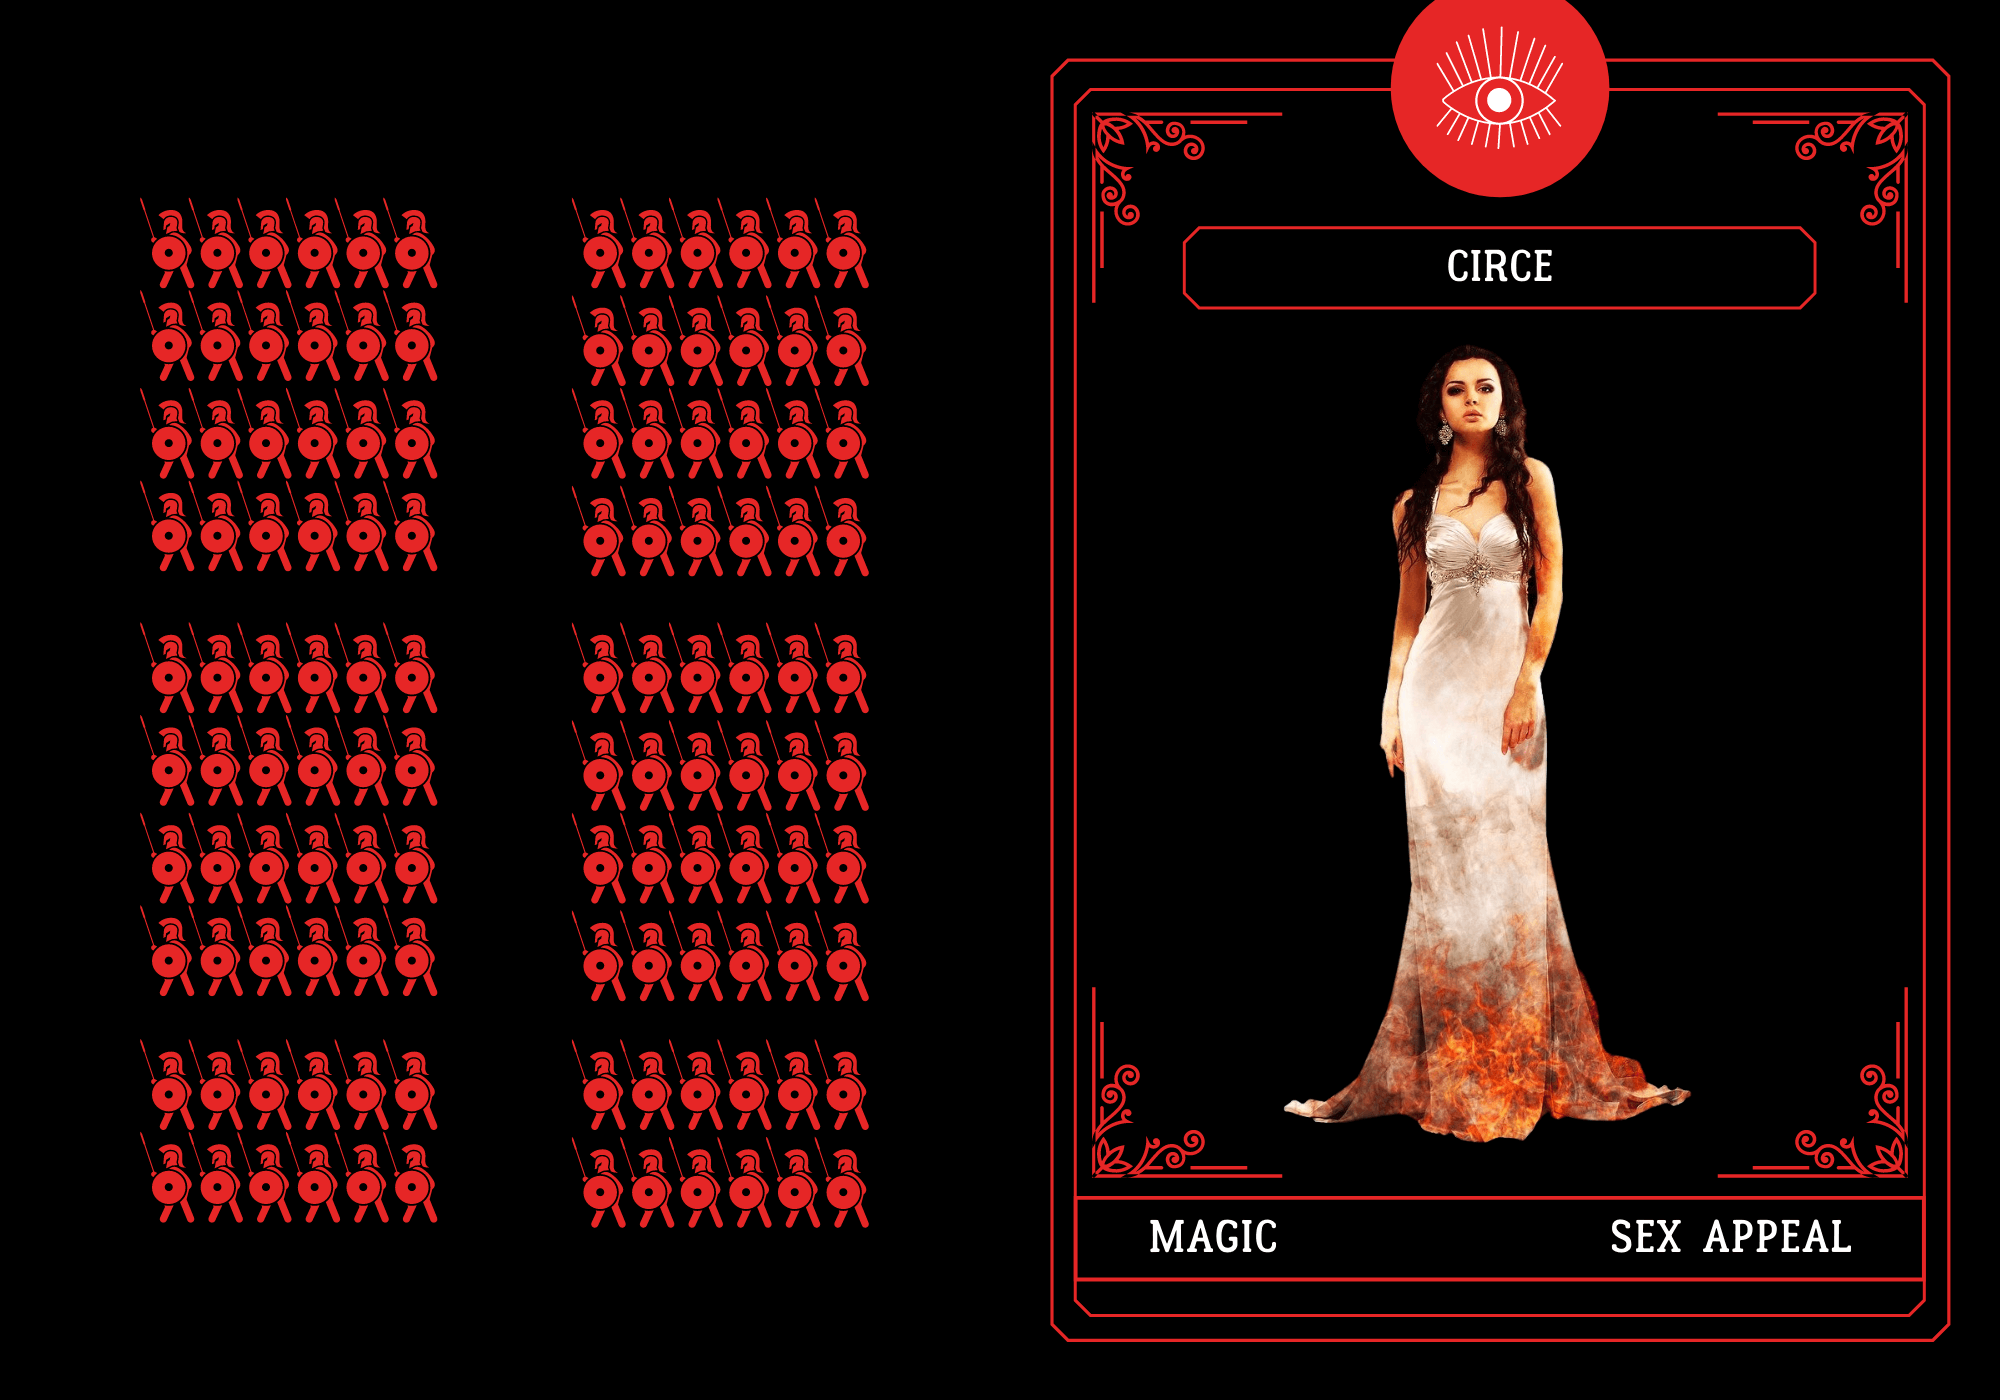 Card illustrating
            Circe's features and attributes